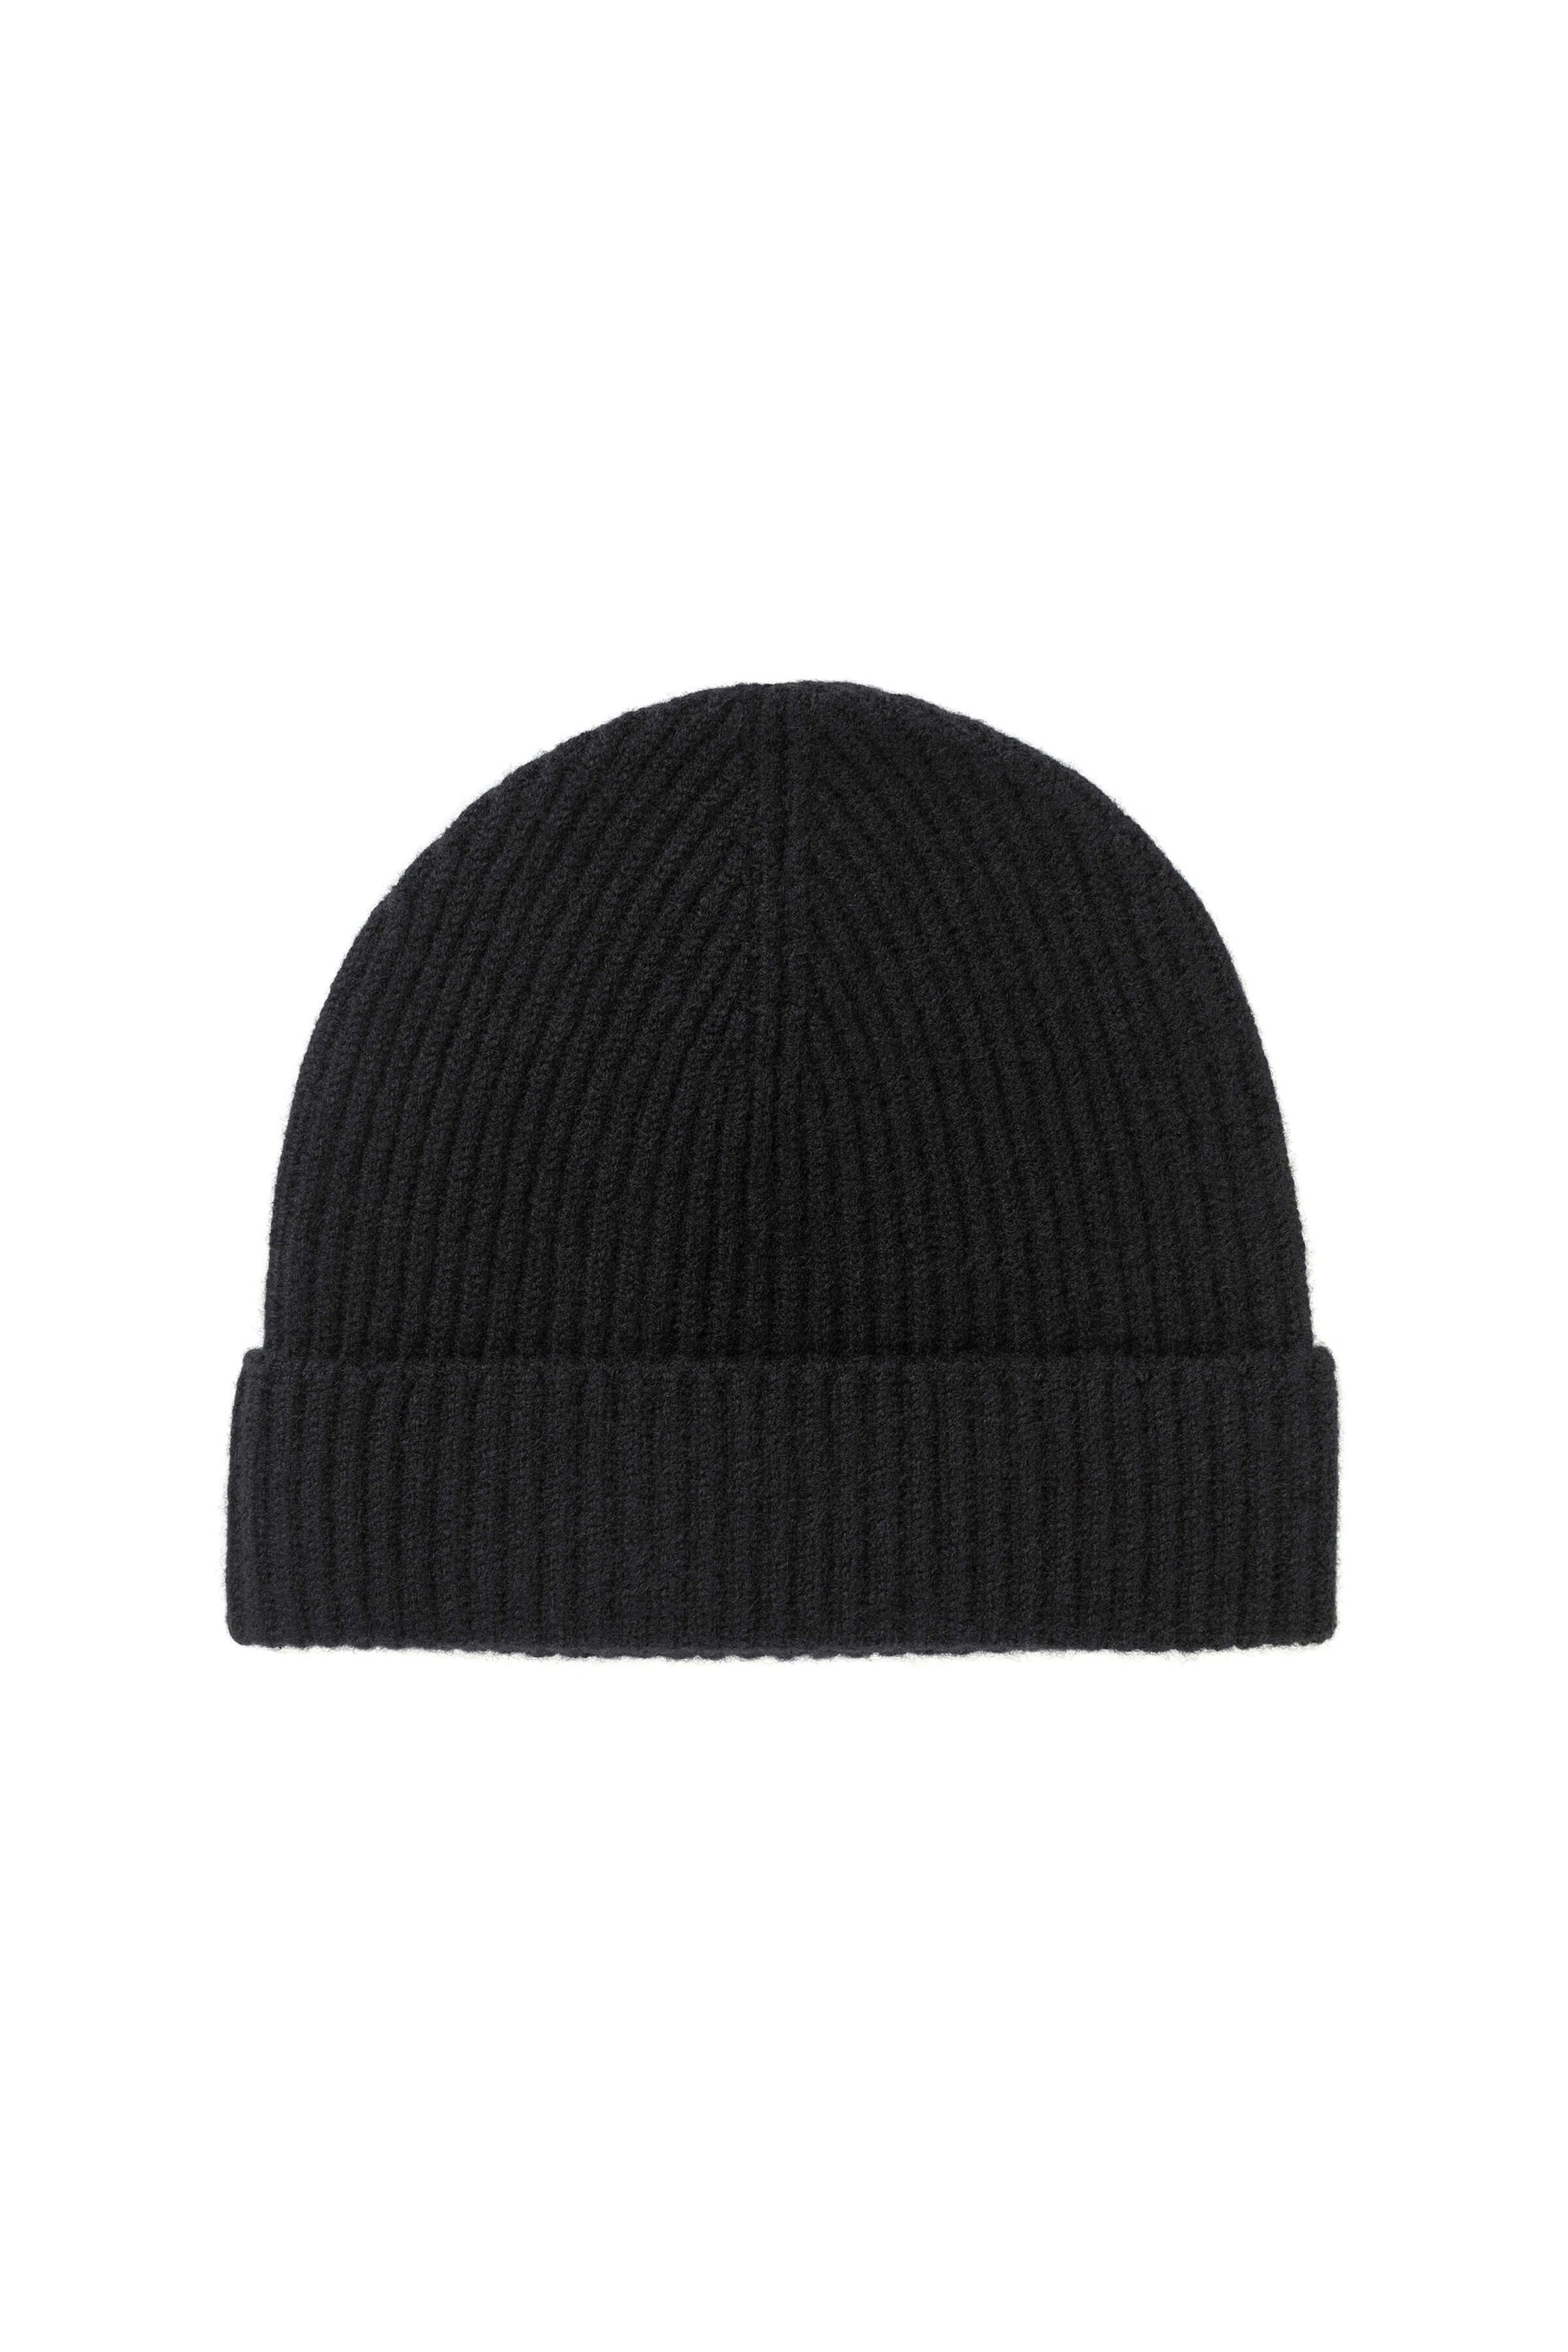 Johnstons of Elgin AW24 Knitted Accessory Black Black Ribbed Cashmere Beanie HAA03320SA0900ONE